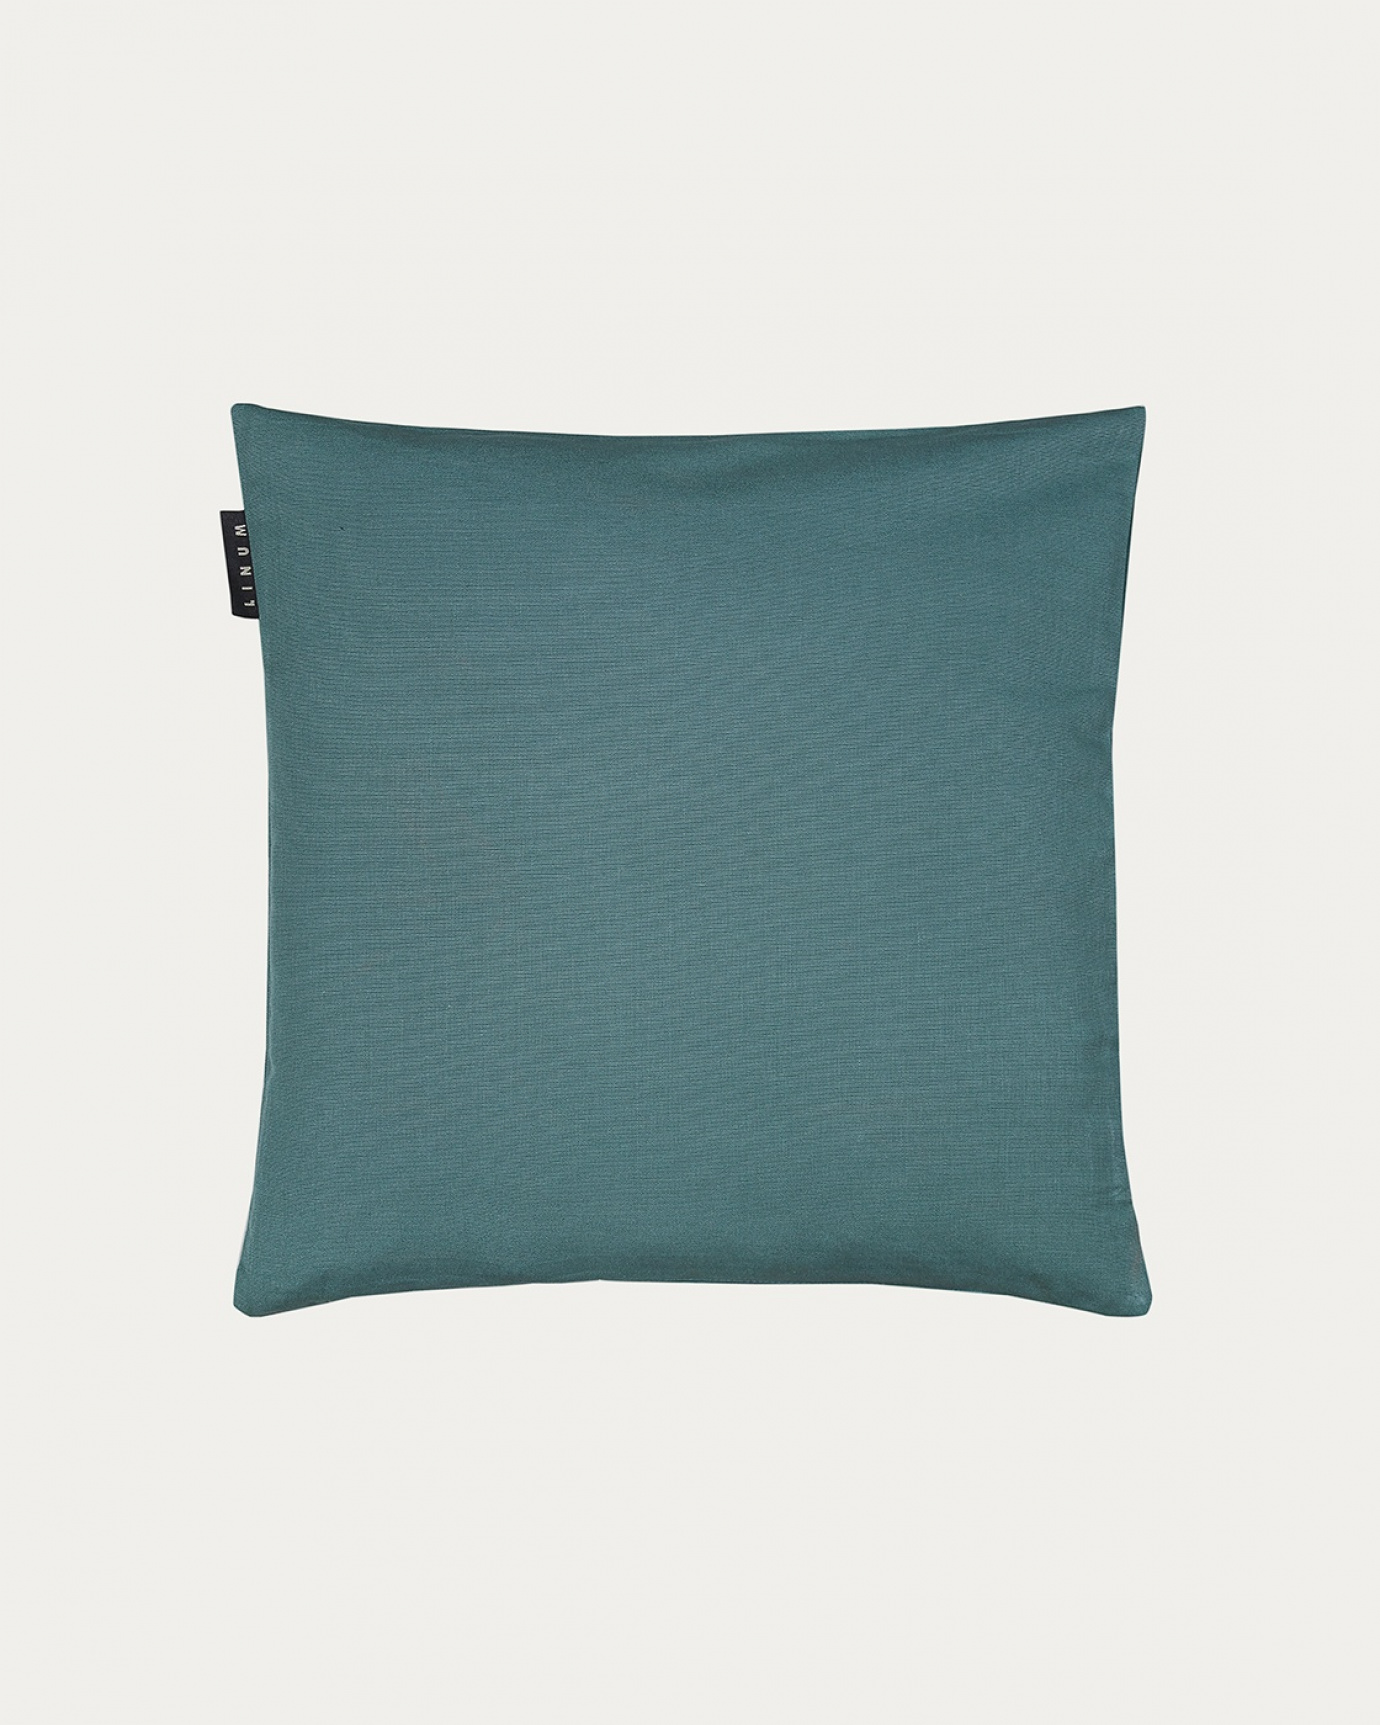 Product image dark grey turquoise ANNABELL cushion cover made of soft cotton from LINUM DESIGN. Size 40x40 cm.